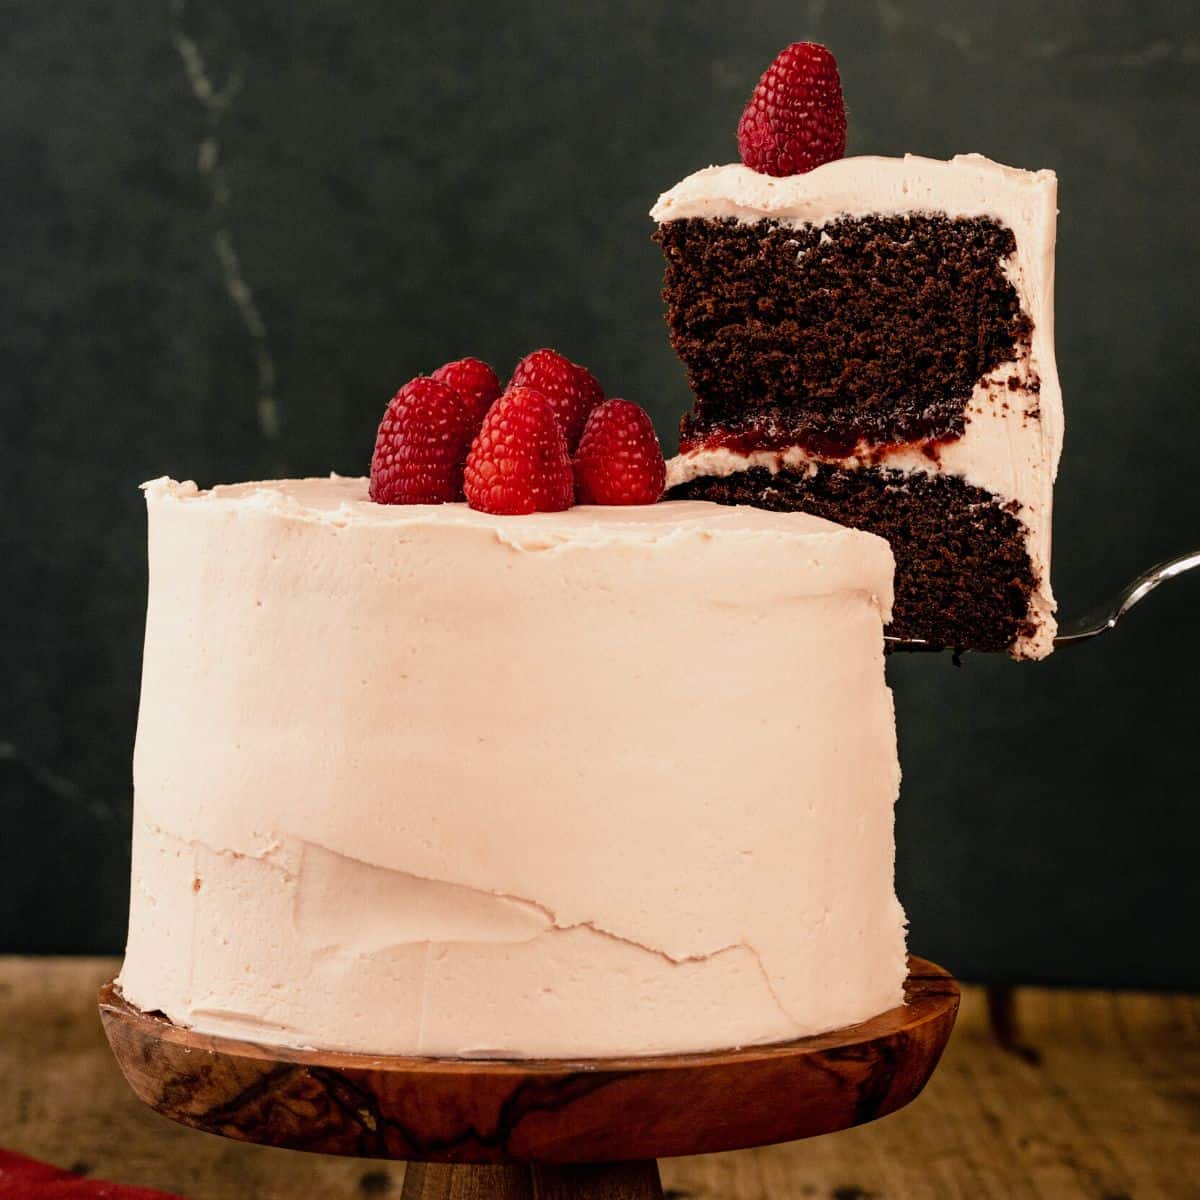 A chocolate raspberry cake covered in pink frosting on a wood cake stand with a slice of cake being lifted out of the cake.